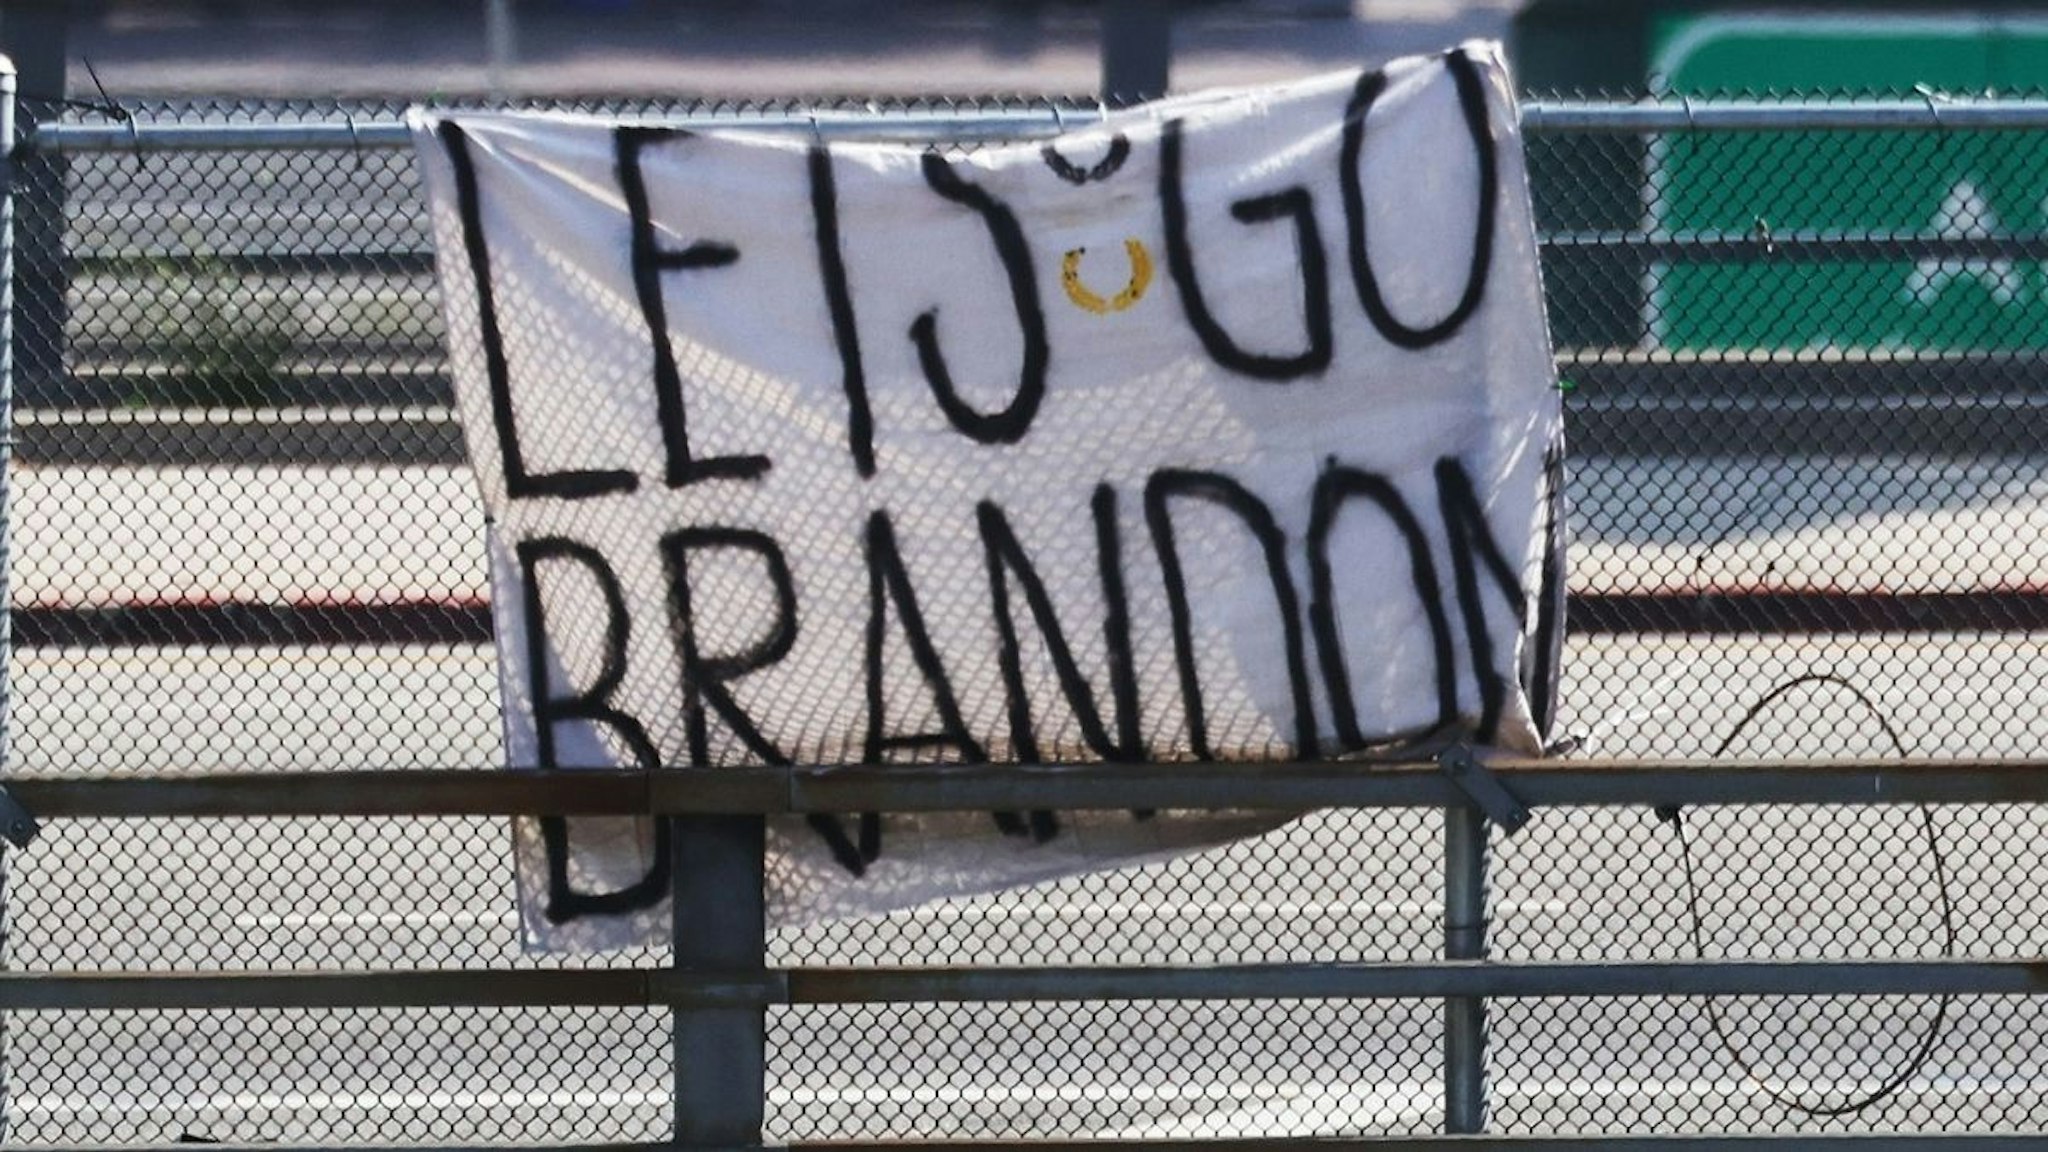 A 'Let's Go Brandon' sign hangs on an overpass near a ‘March for Freedom’ rally where people were demonstrating against the L.A. City Council’s COVID-19 vaccine mandate for city employees and contractors on November 8, 2021 in Los Angeles, California.